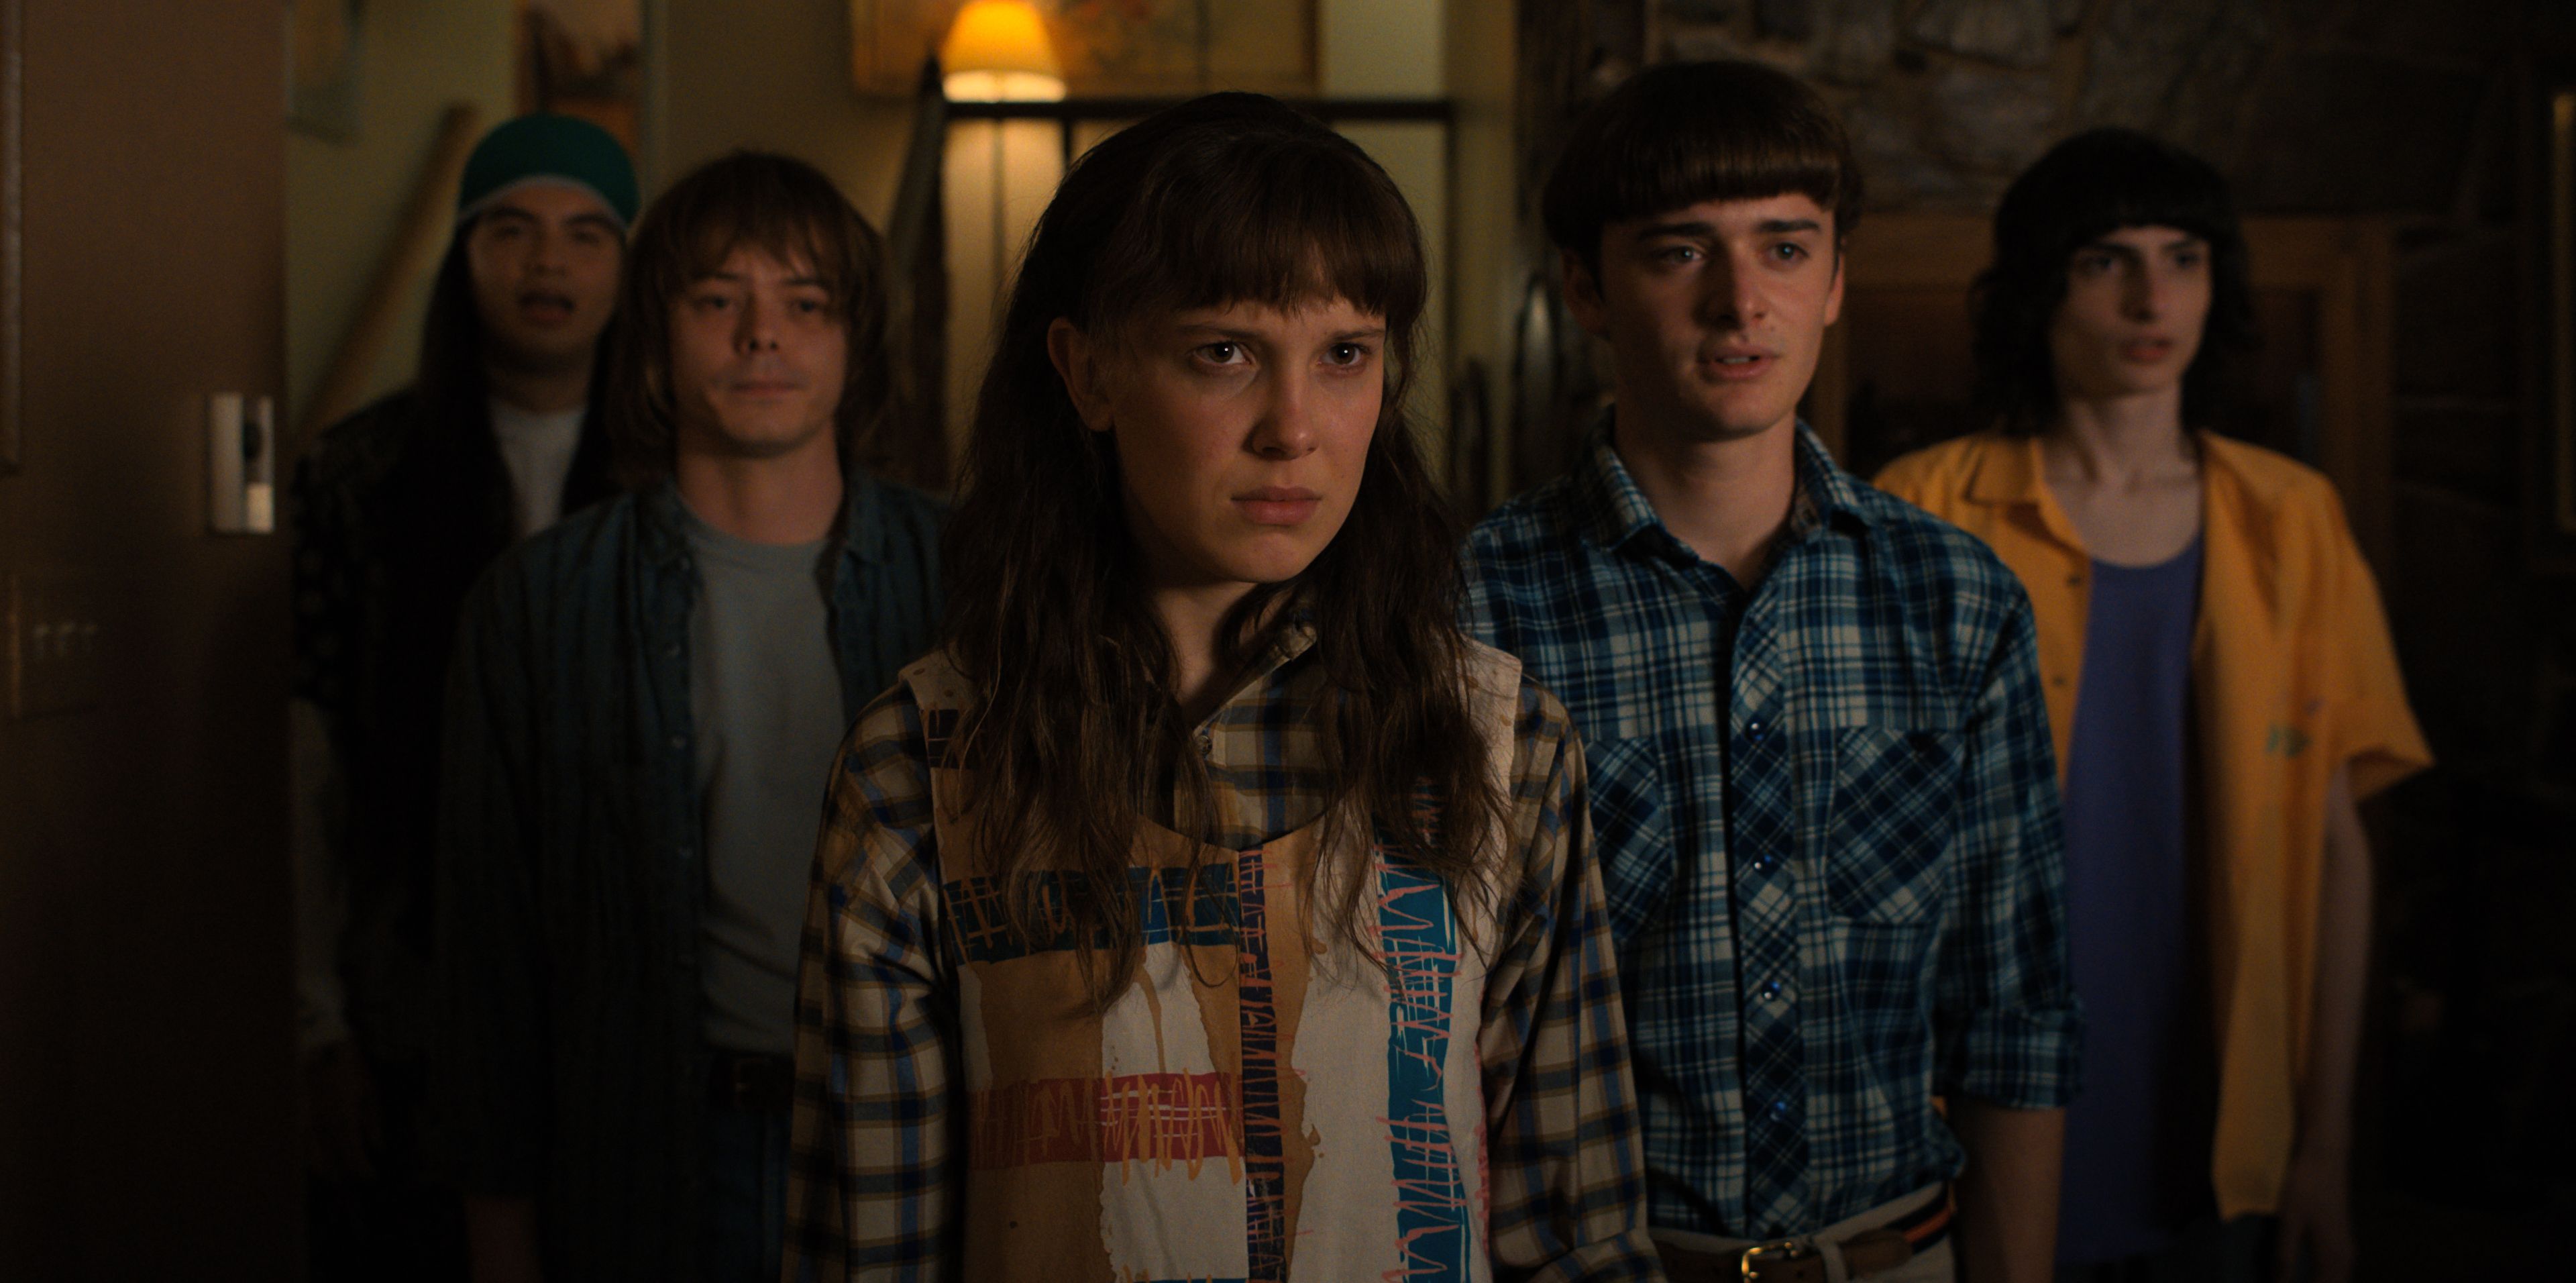 Netflix's 'All Of Us Are Dead' – Is There a Season 2 Release Date?  Everything We Know So Far, All Of Us Are Dead, Netflix, Television